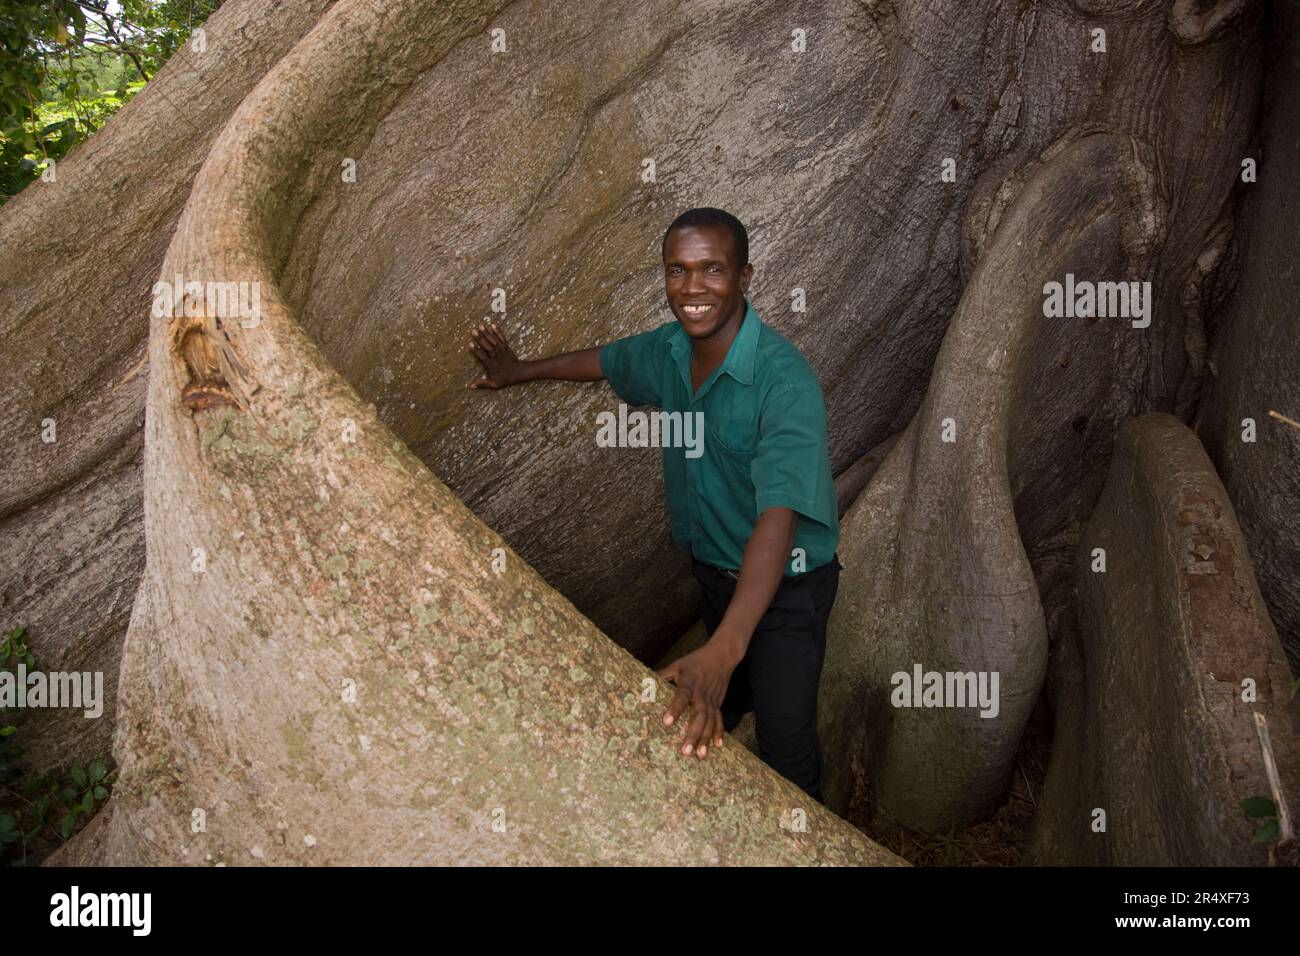 Male tour guide next to the buttress roots of a ceiba tree; Bluefields Bay, Jamaica Stock Photo